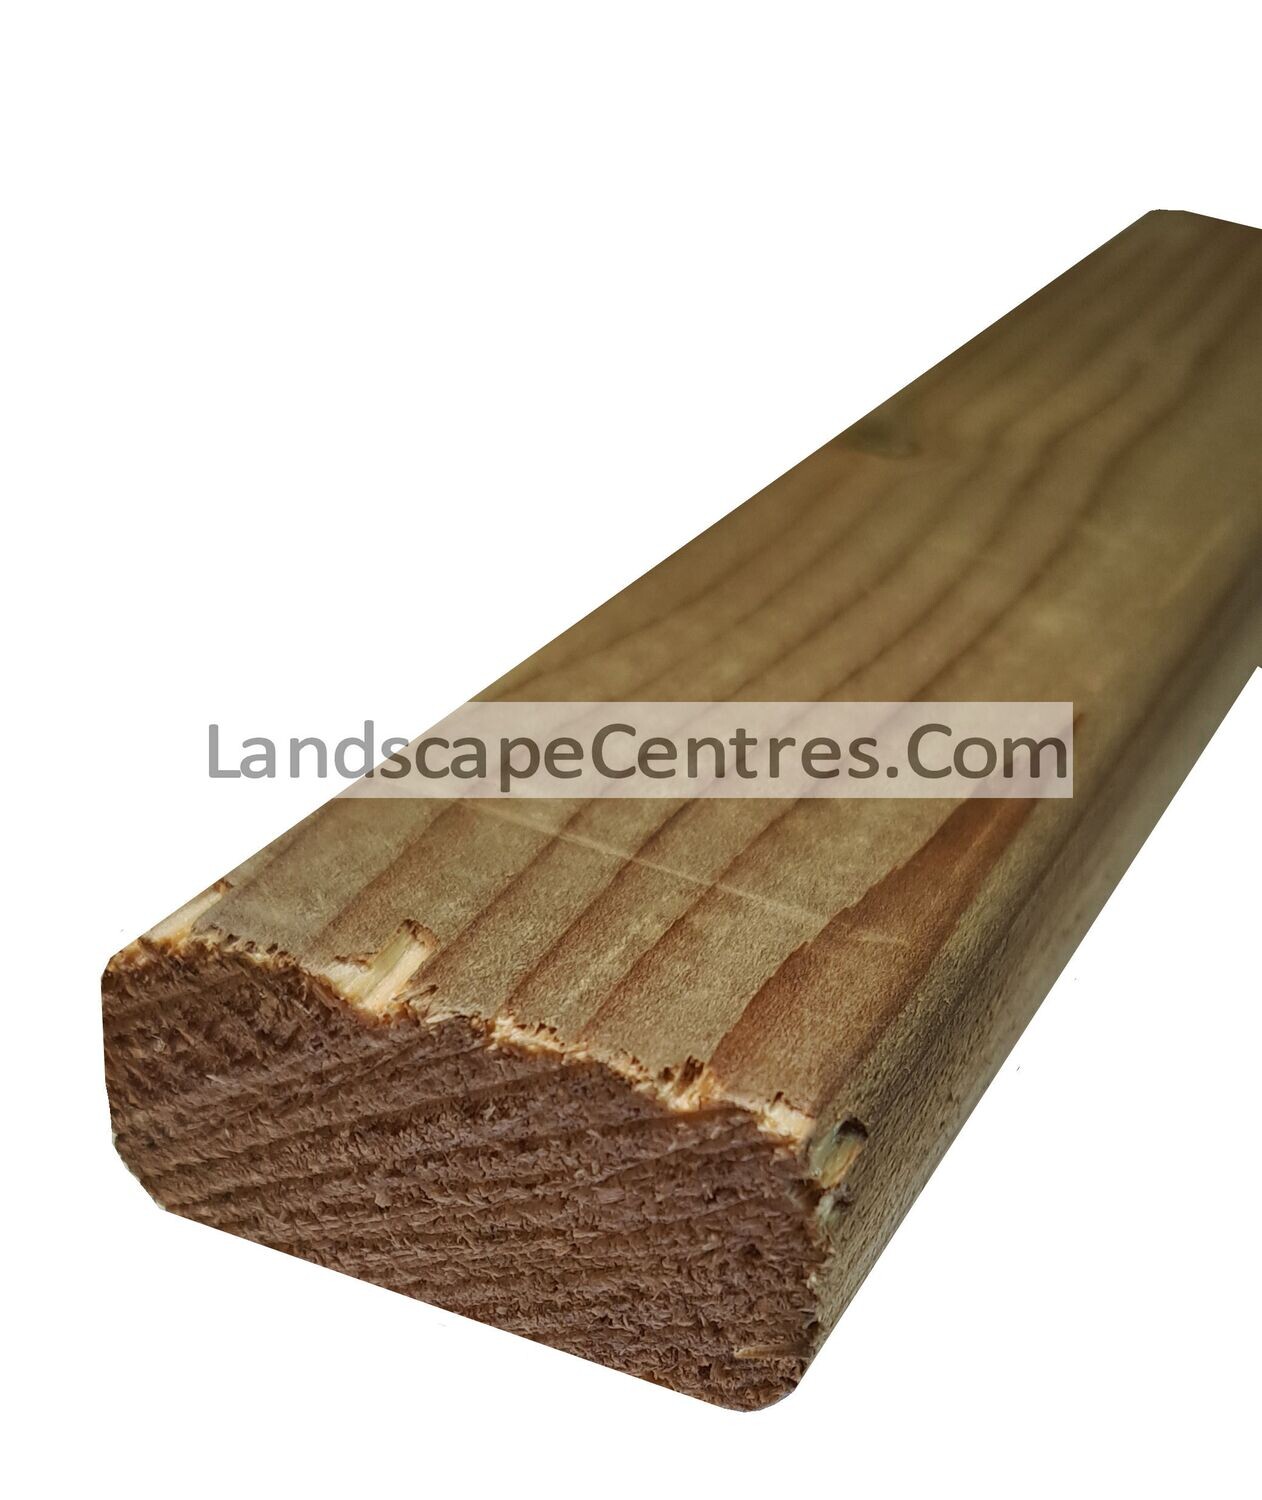 1 1/2" x 1" Tan Rounded Slatted Timbers (42x19mm)